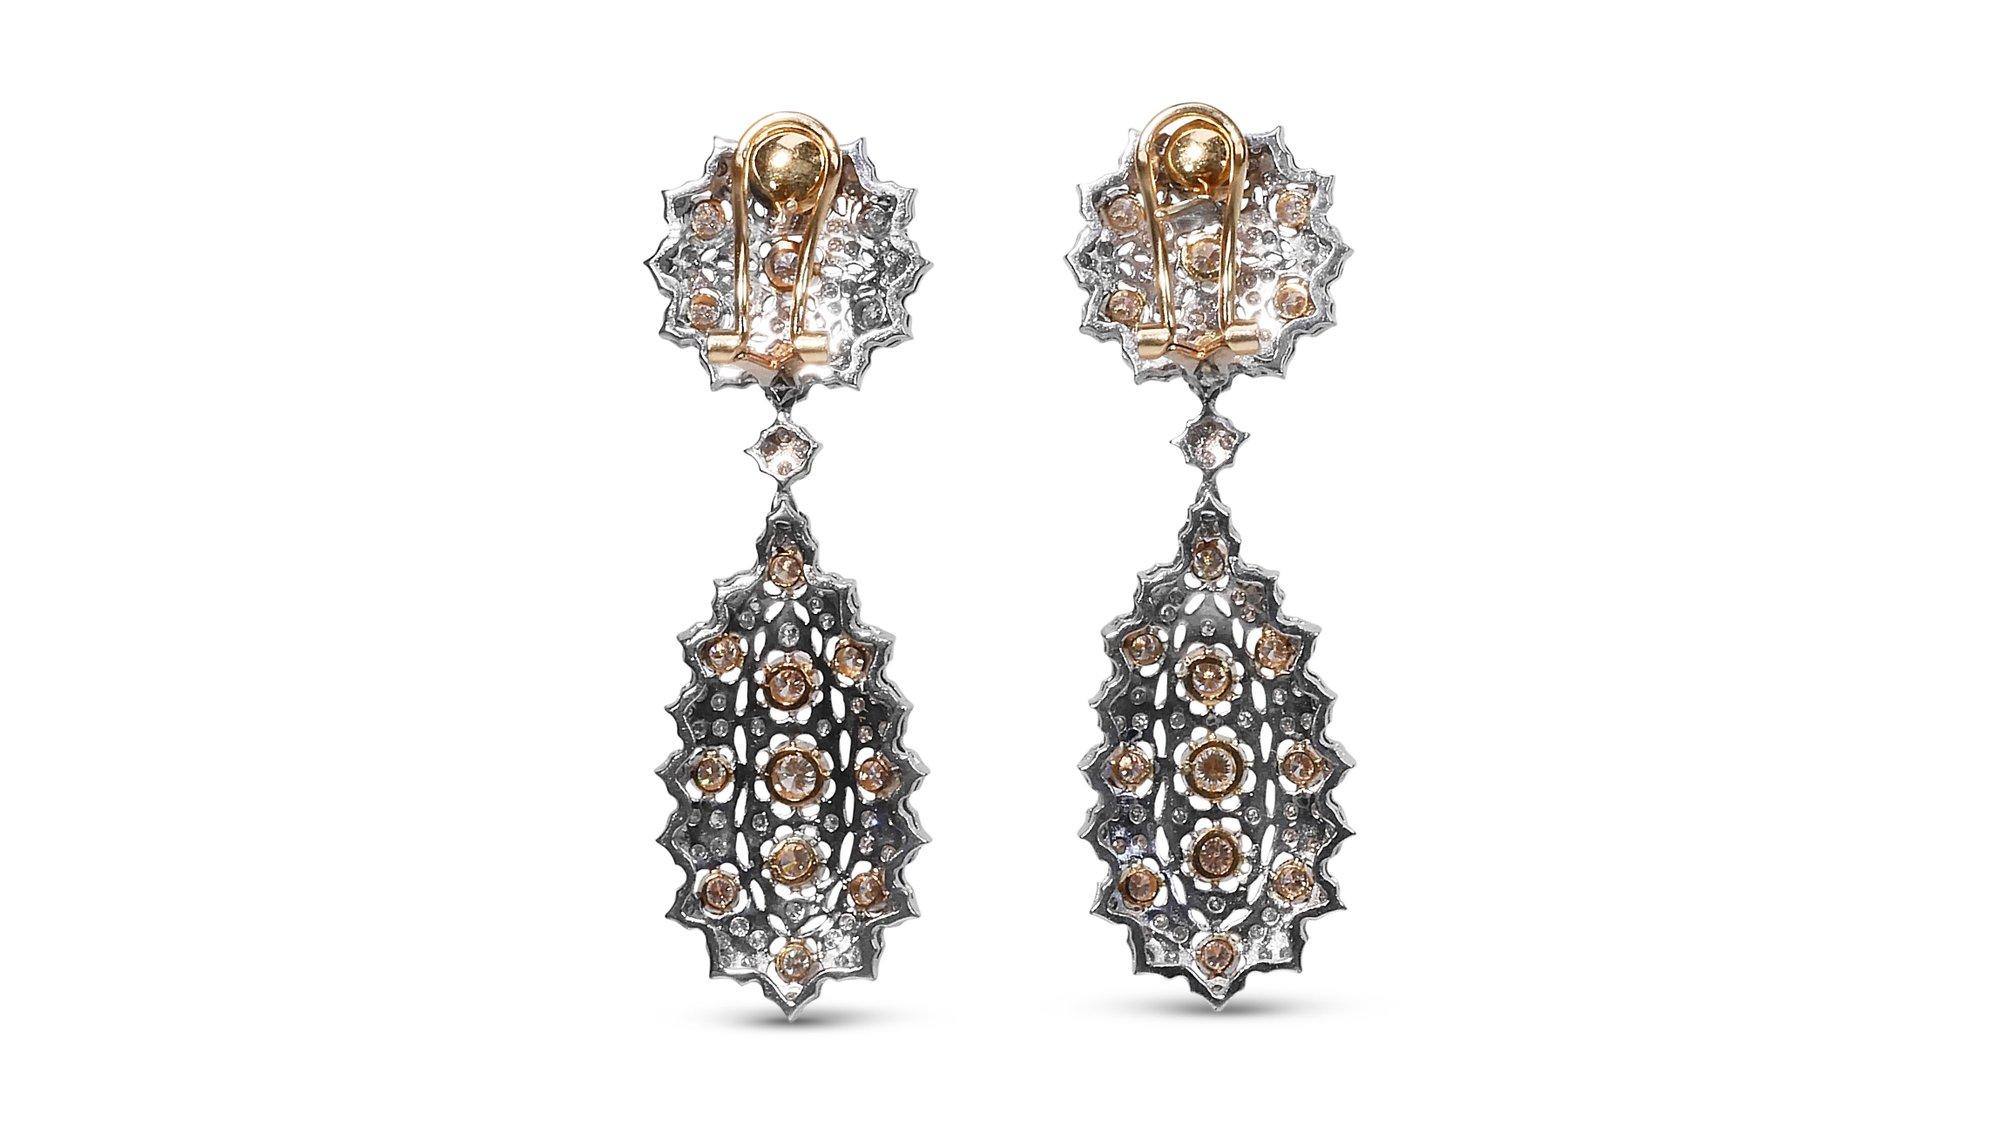 Stunning Art Deco style earrings made from 18k white & yellow gold with 4.50 total carat of round brilliant diamonds. This earring comes with an IGI report and a fancy box.

- 264 diamond main stone of 0.0171 ct. each, total: 4.50 ct. 
Cut: Round